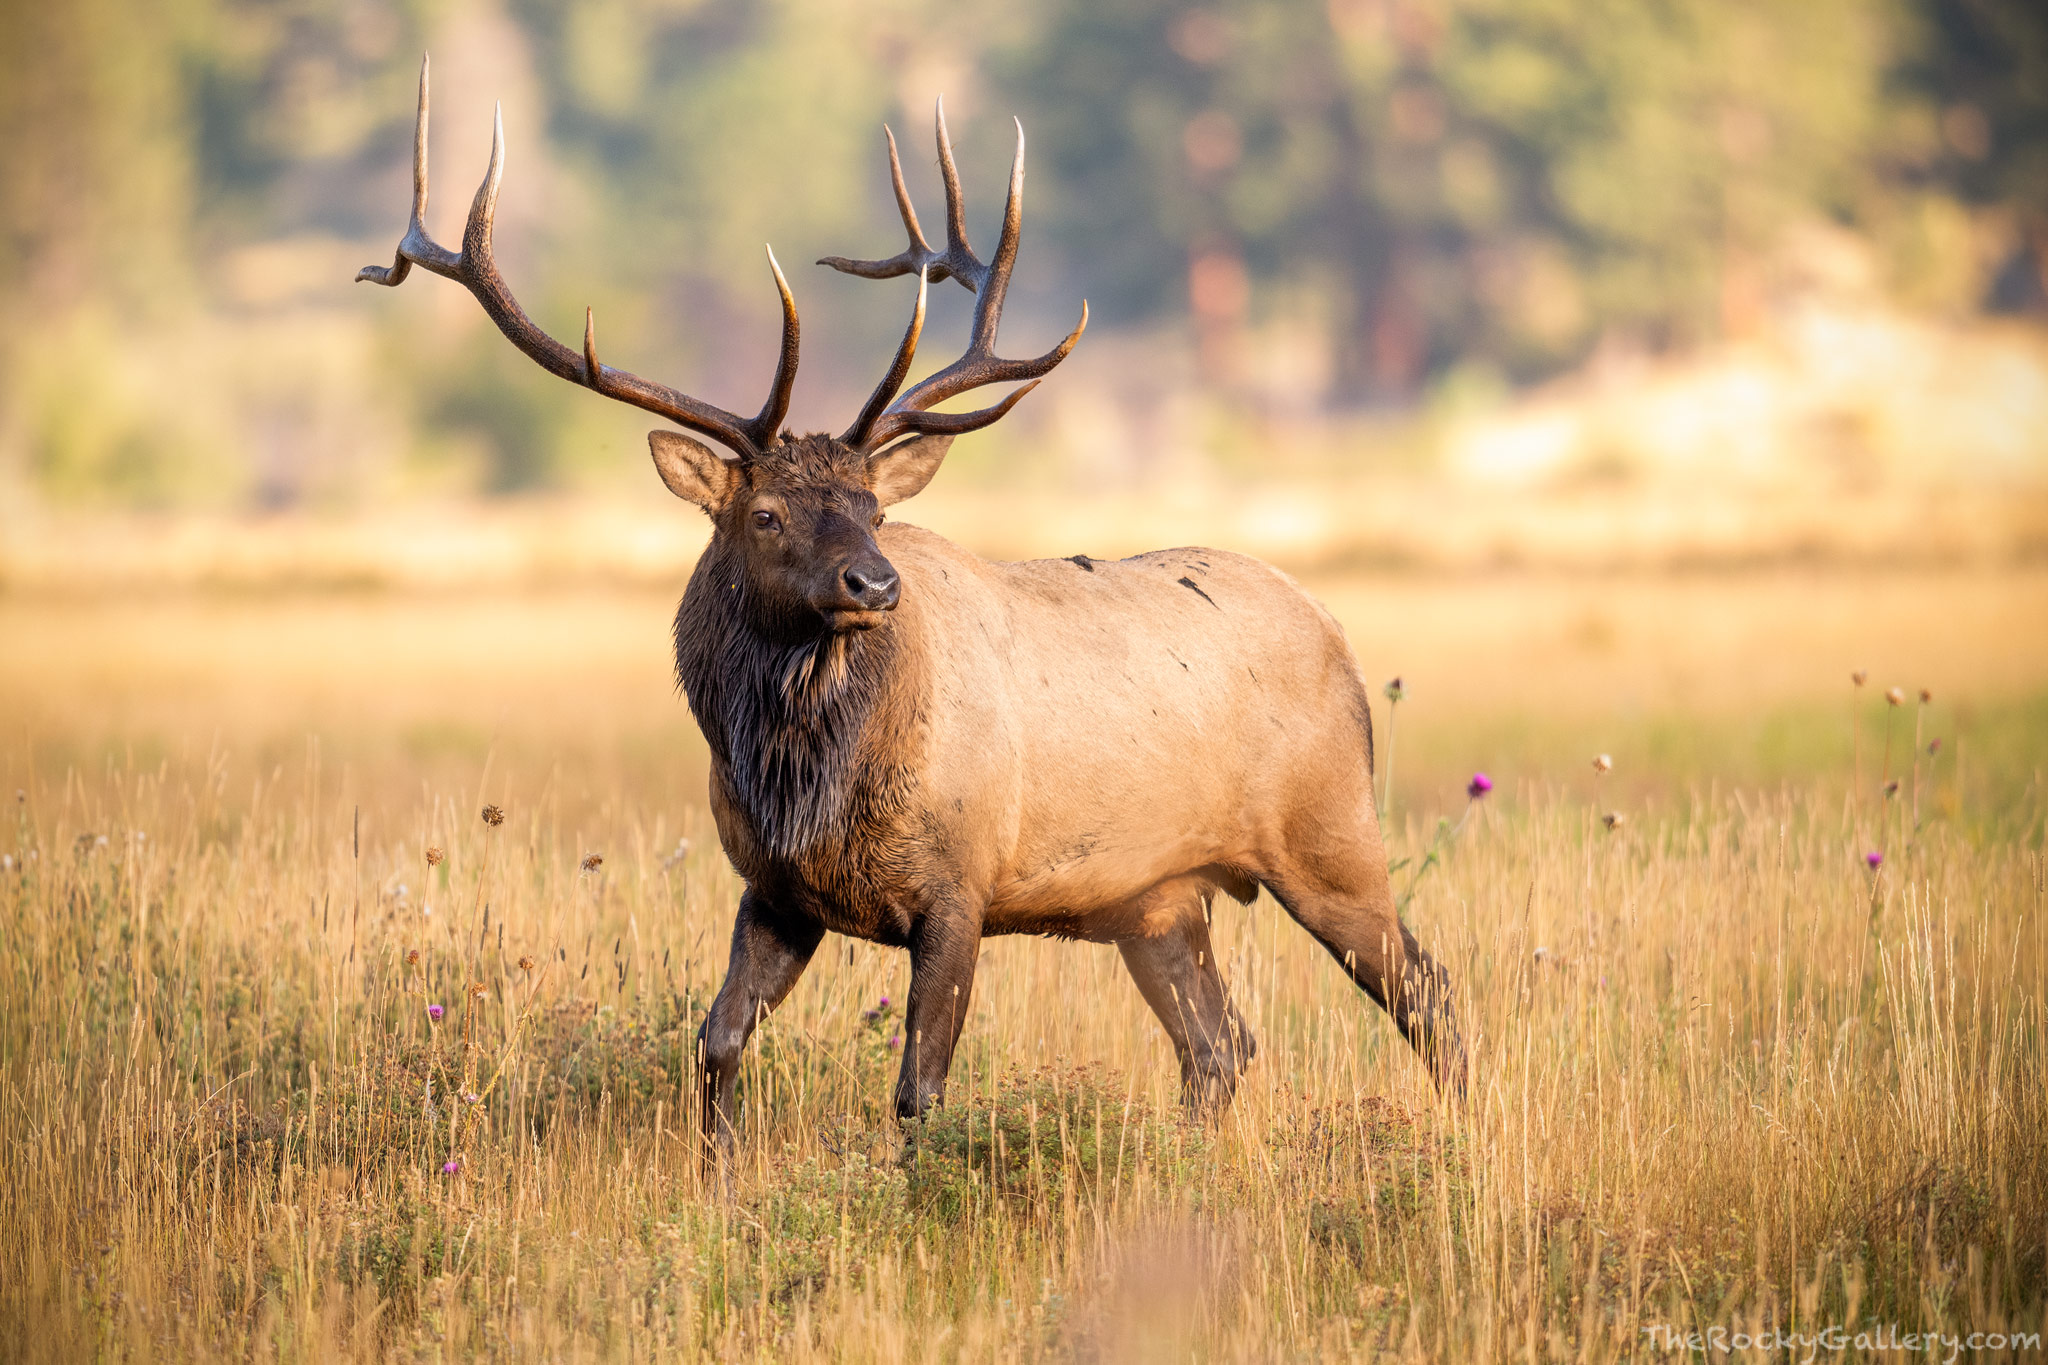 This large bull elk was putting on quite a show in the meadows of Moraine Park just after sunrise. Challenging a few other large...